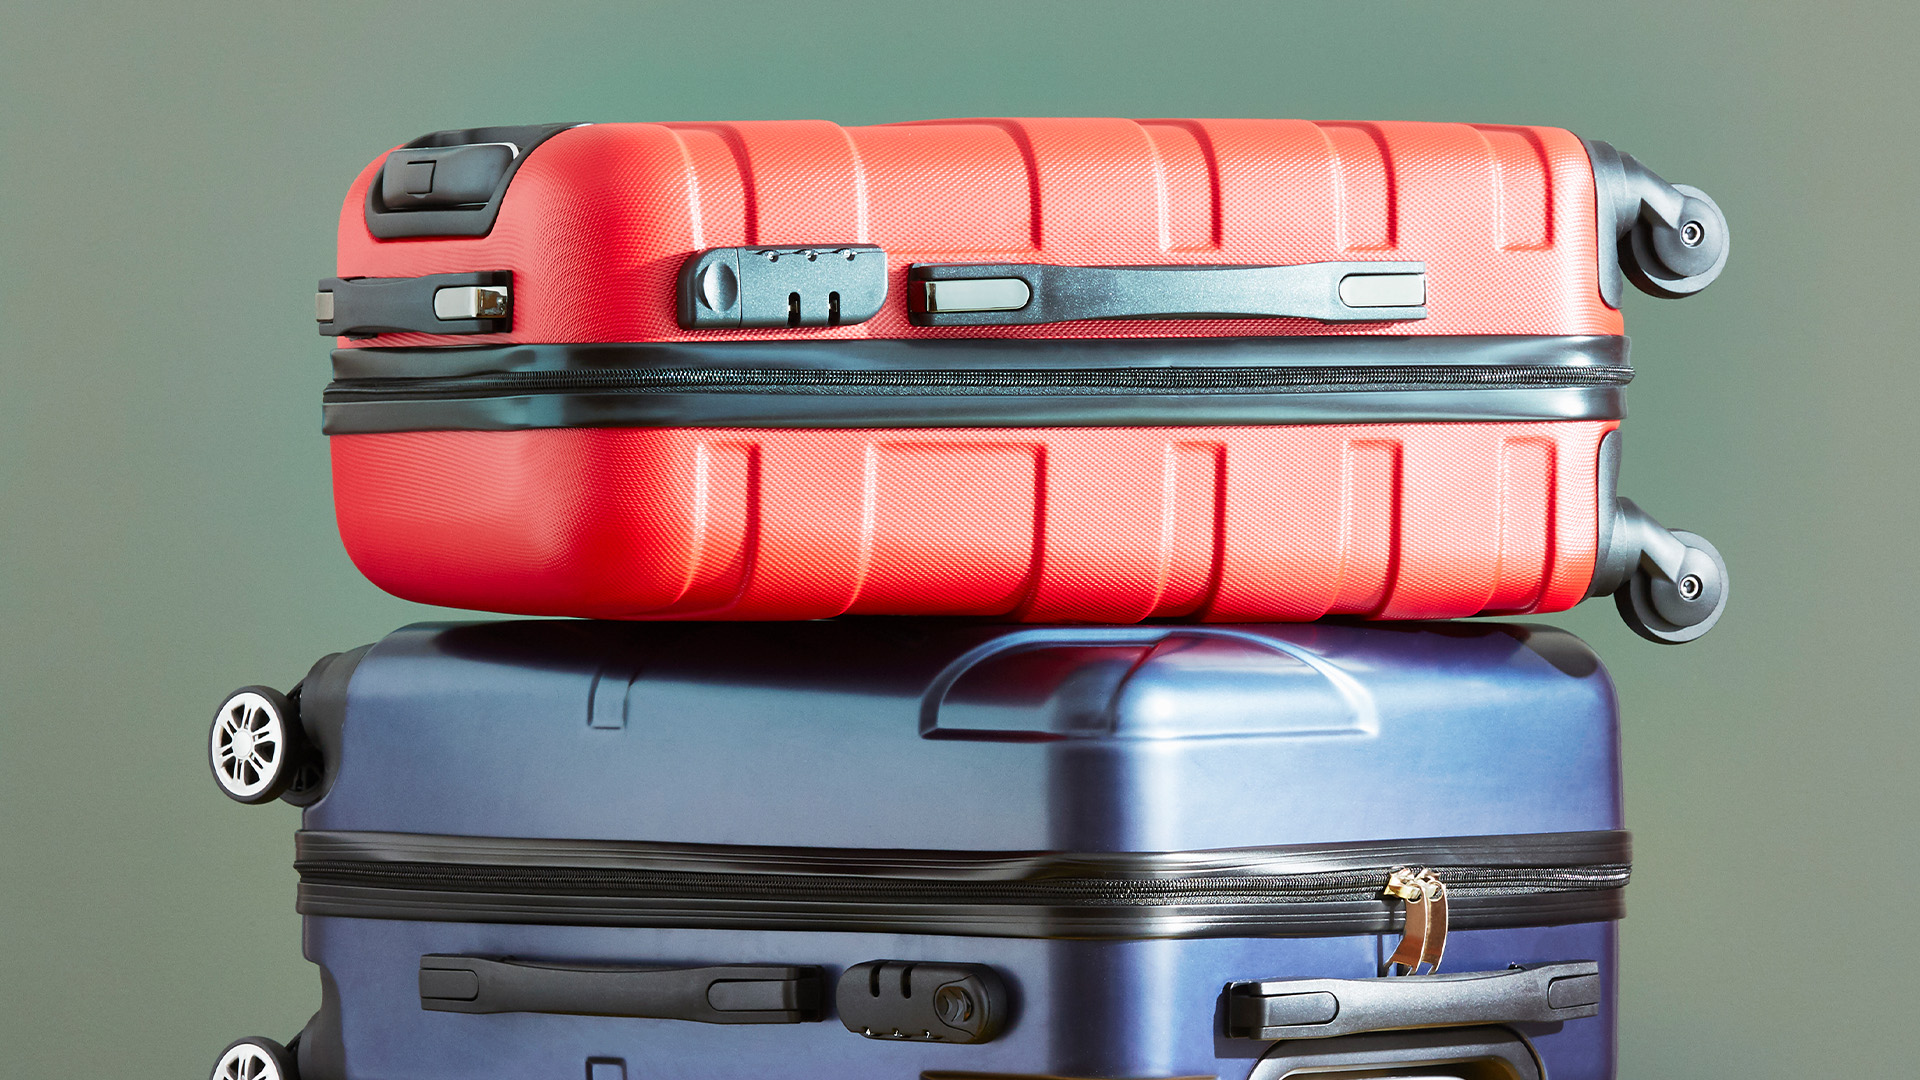 Uncover the Real Truth Behind Ego-Driven Suitcase Style: A Luggage Porter’s Revealing Analysis